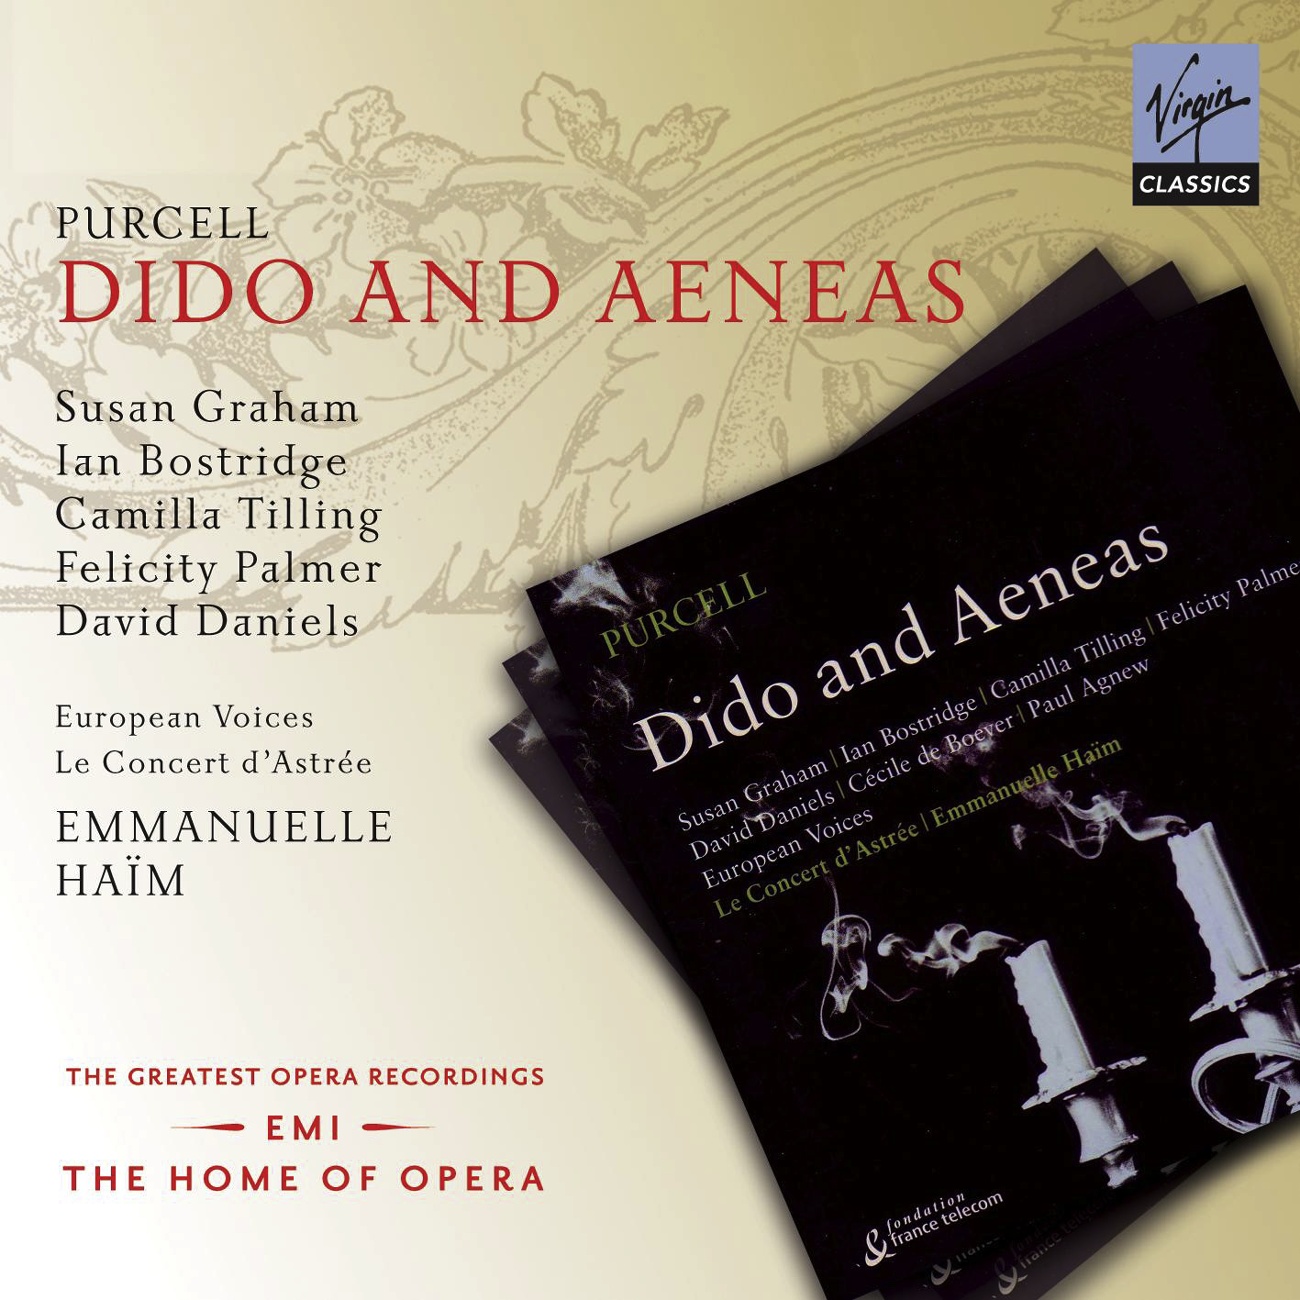 Dido and Aeneas, ACT 3, Scene 2: When I am laid in earth (Dido)